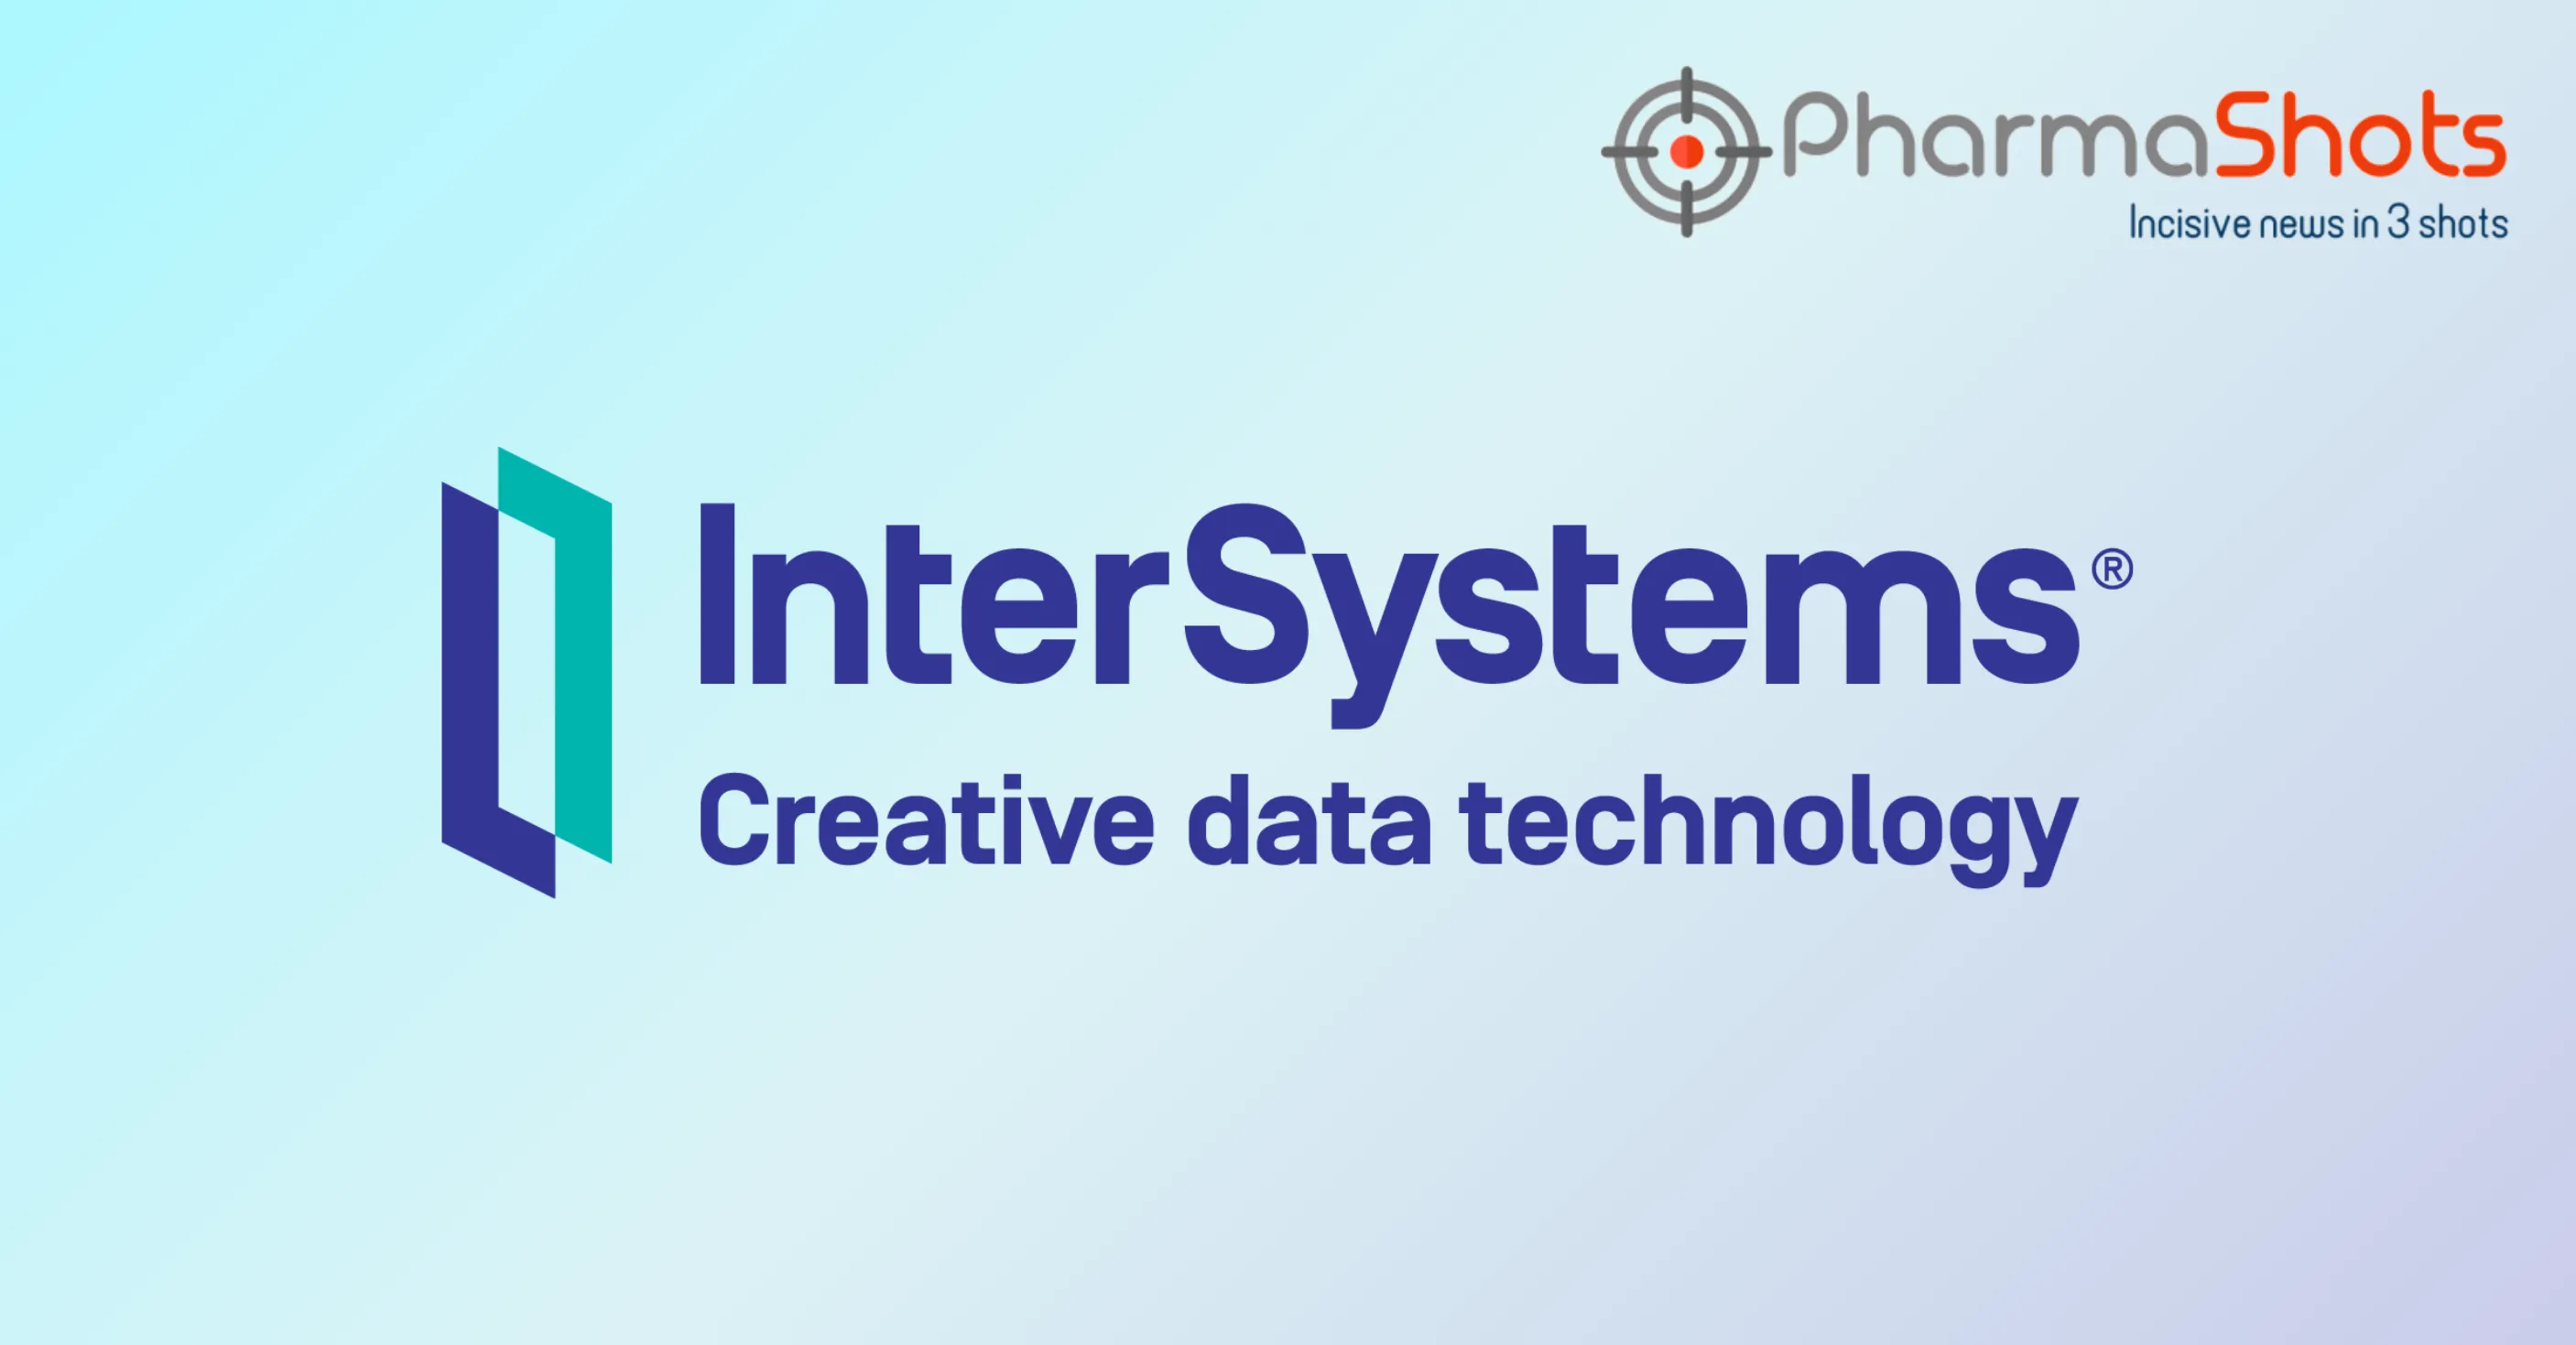 InterSystems and ImmunoPrecise Antibodies (IPA) Partner to Integrate the Vector Capability of IRIS Data Platform and LENSai for Healthcare Applications